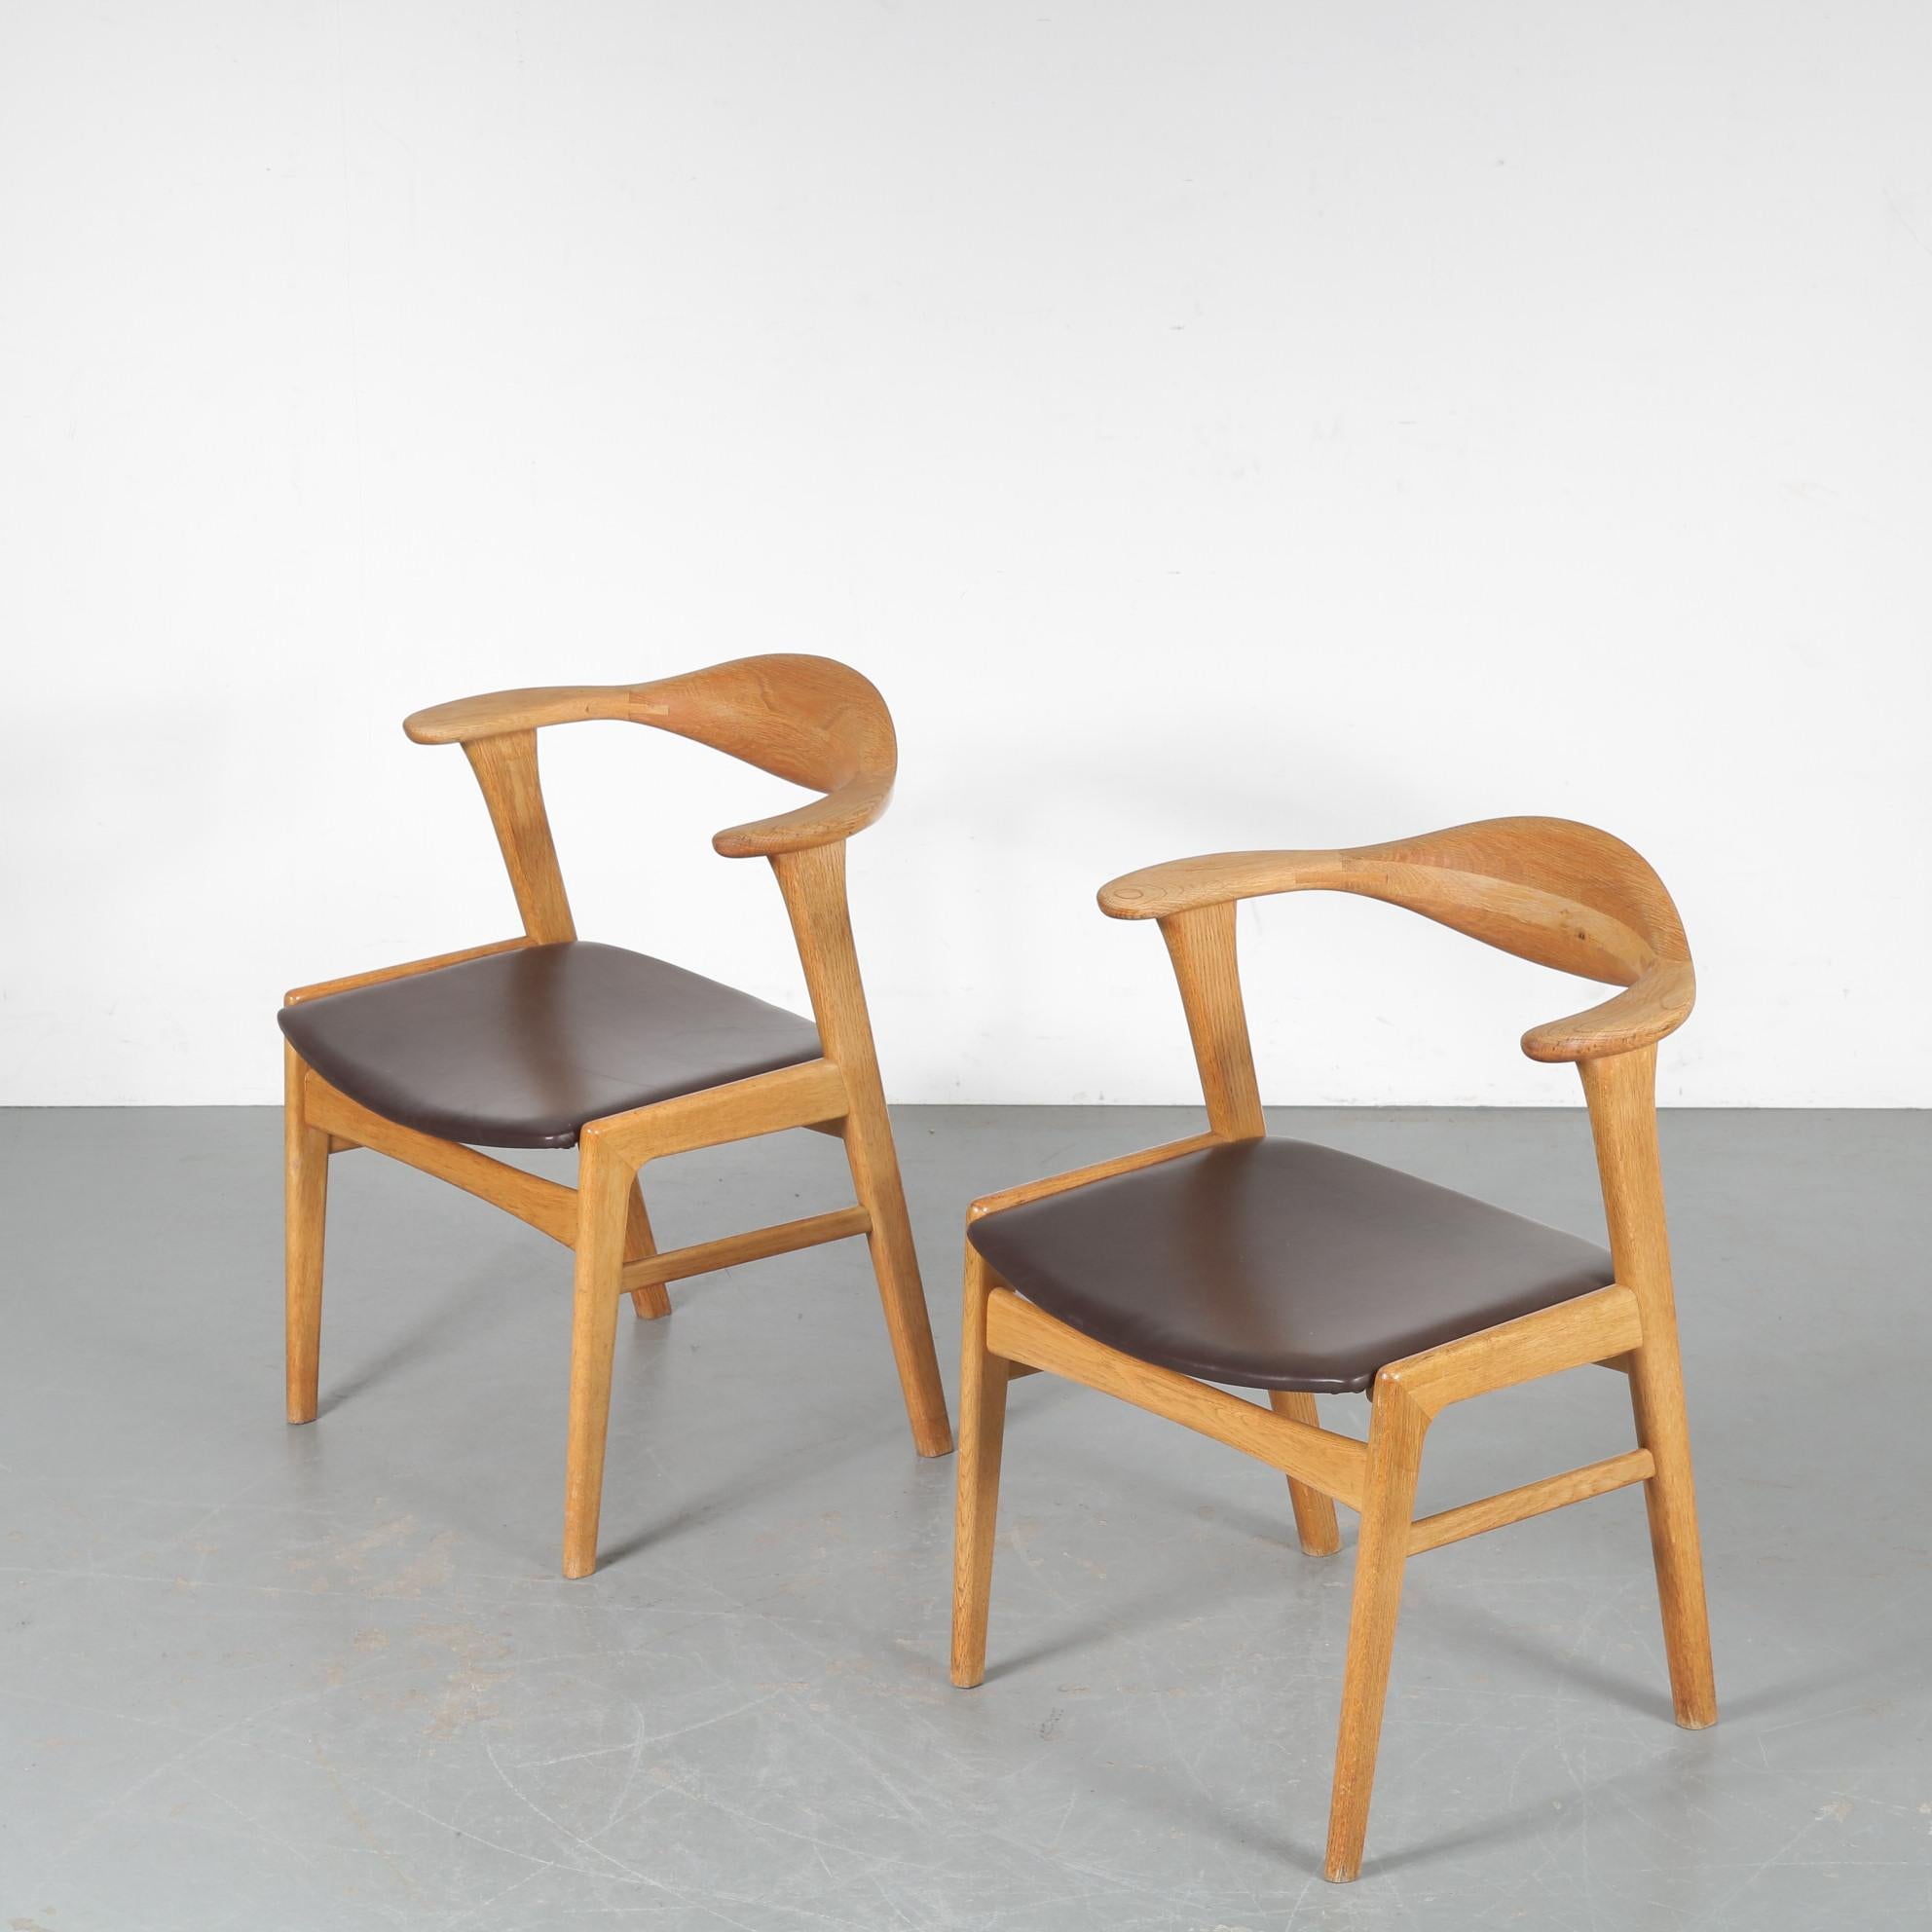 Beautiful elegant dining or side chairs designed by Erik Kirkegaard, manufactured by Hong Stolefabrik in Denmark around 1950.

The chairs are made of high quality teak wood in a nice, natural brown colour. The brown leather upholstered seats match